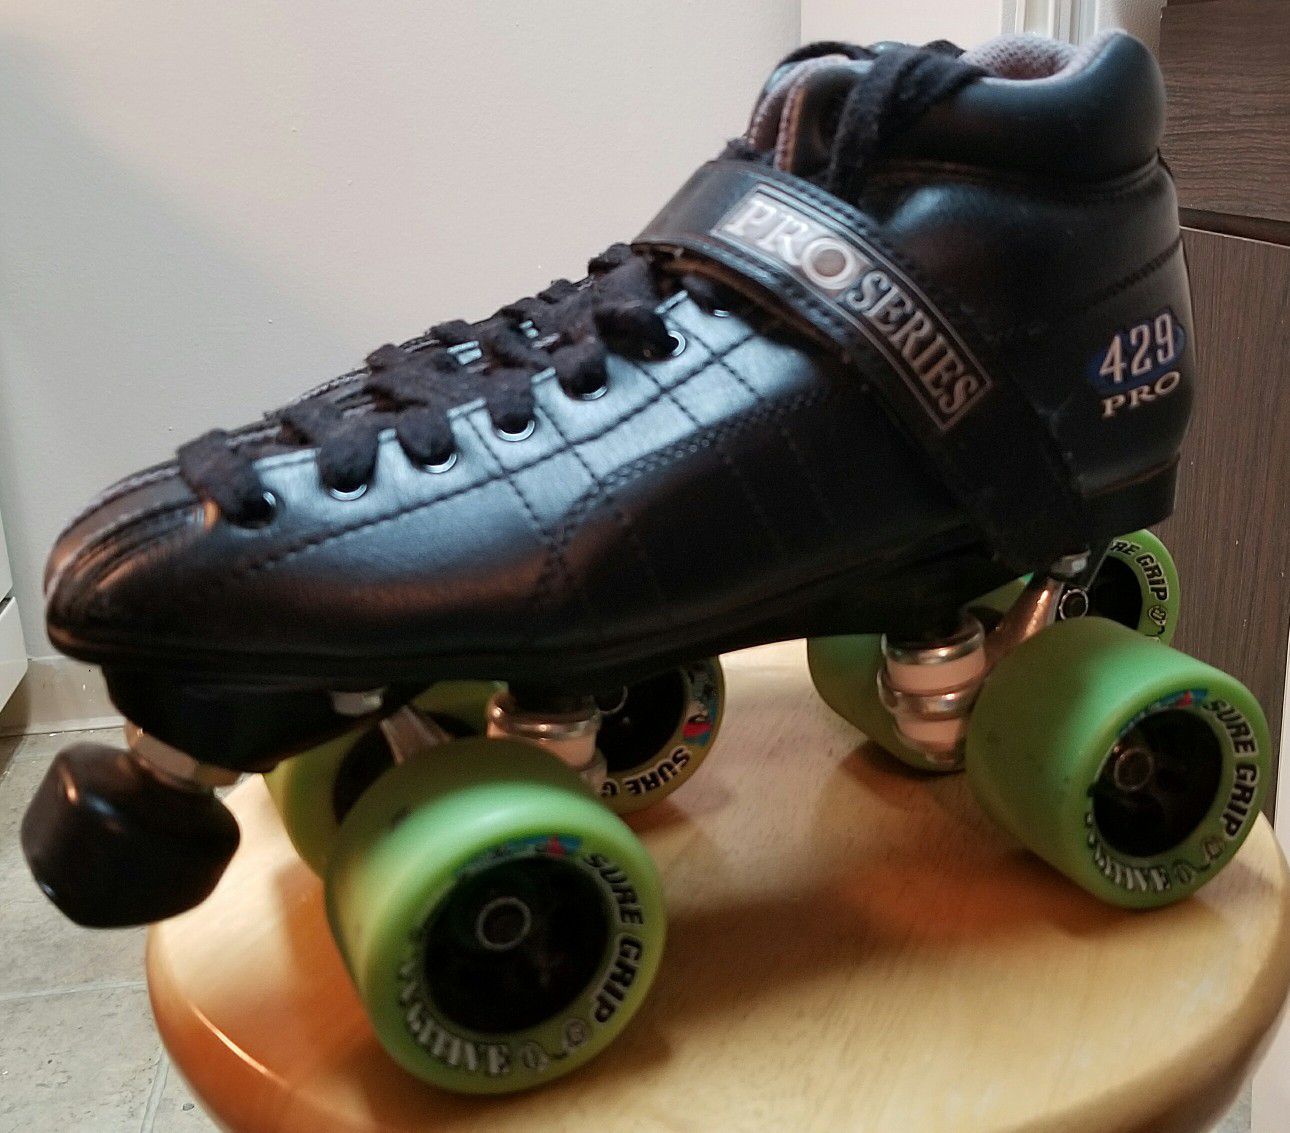 Pacer 429 Pro skates. Great condition. Size 8.